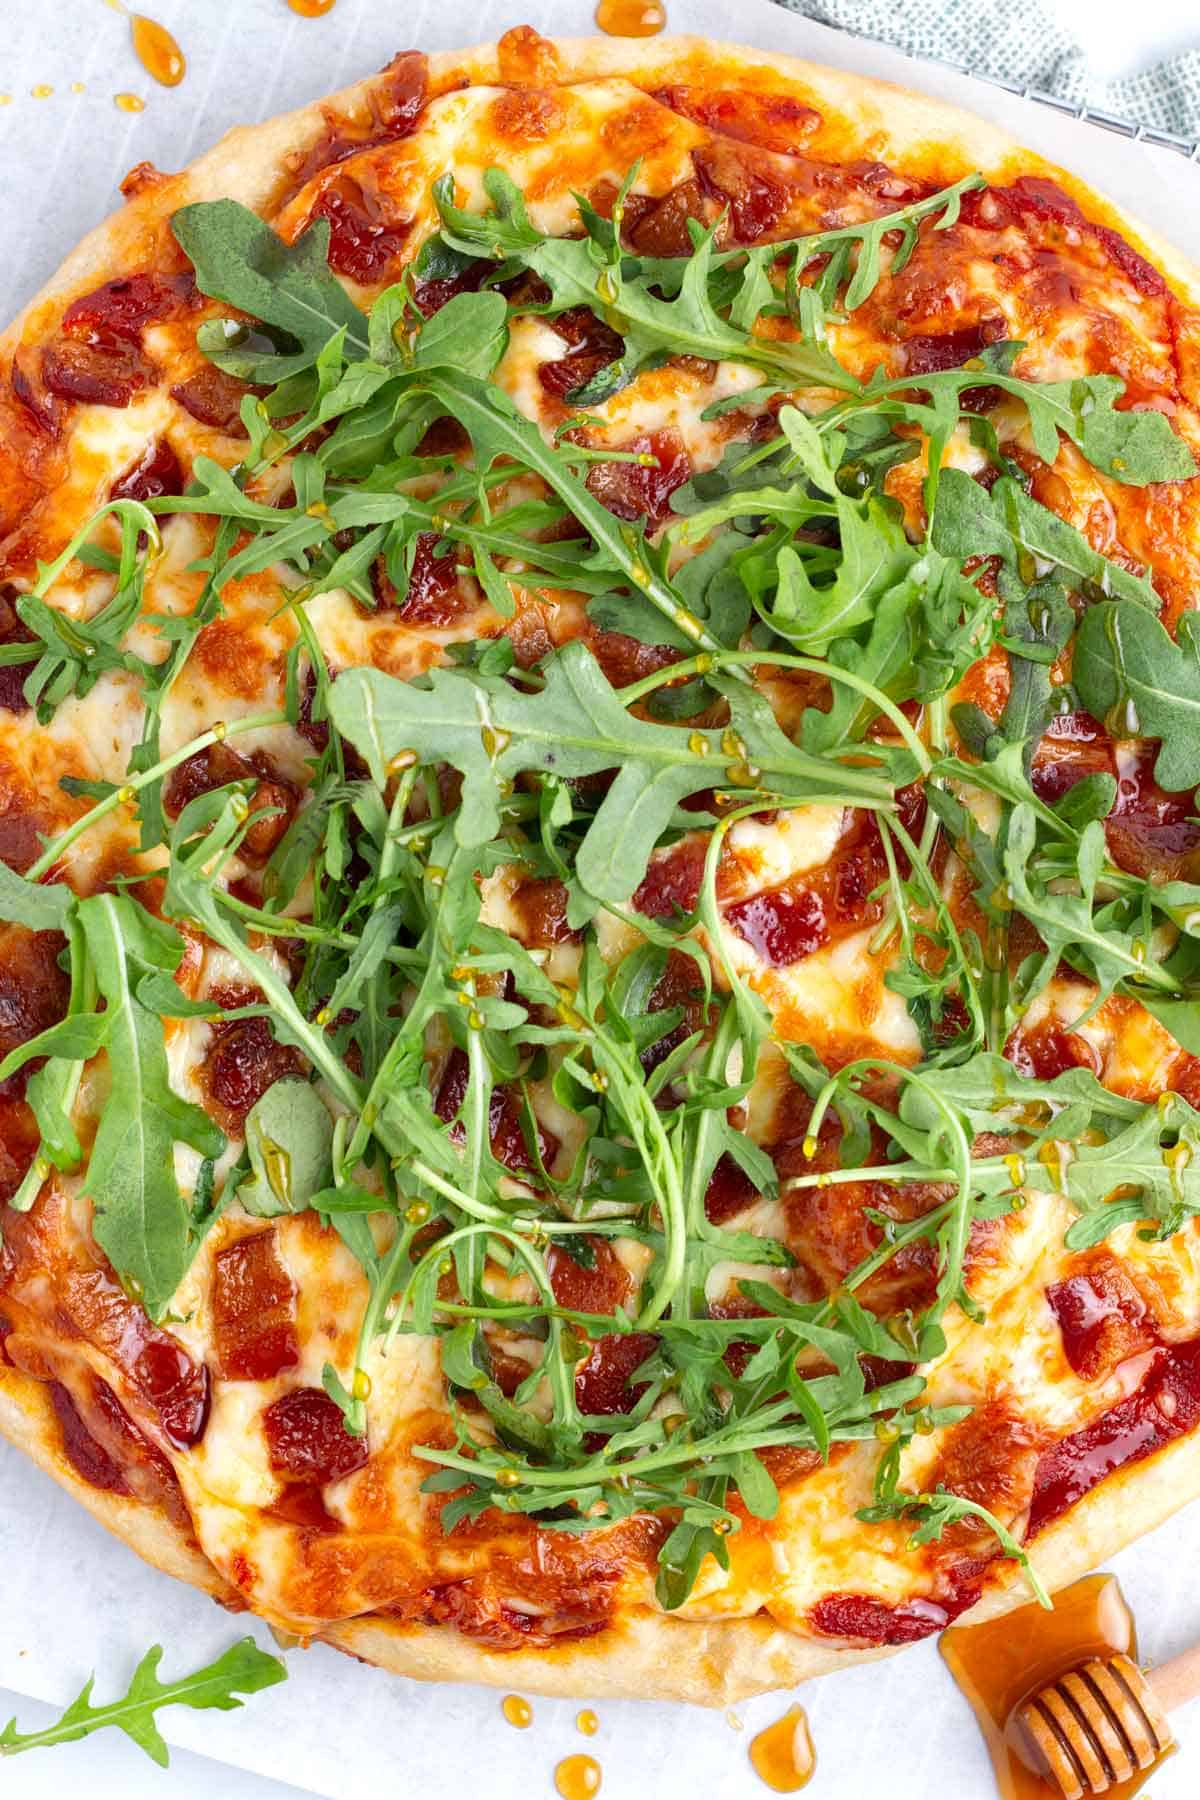 Hot honey drizzled over cast iron pizza topped with bacon and arugula after baking.